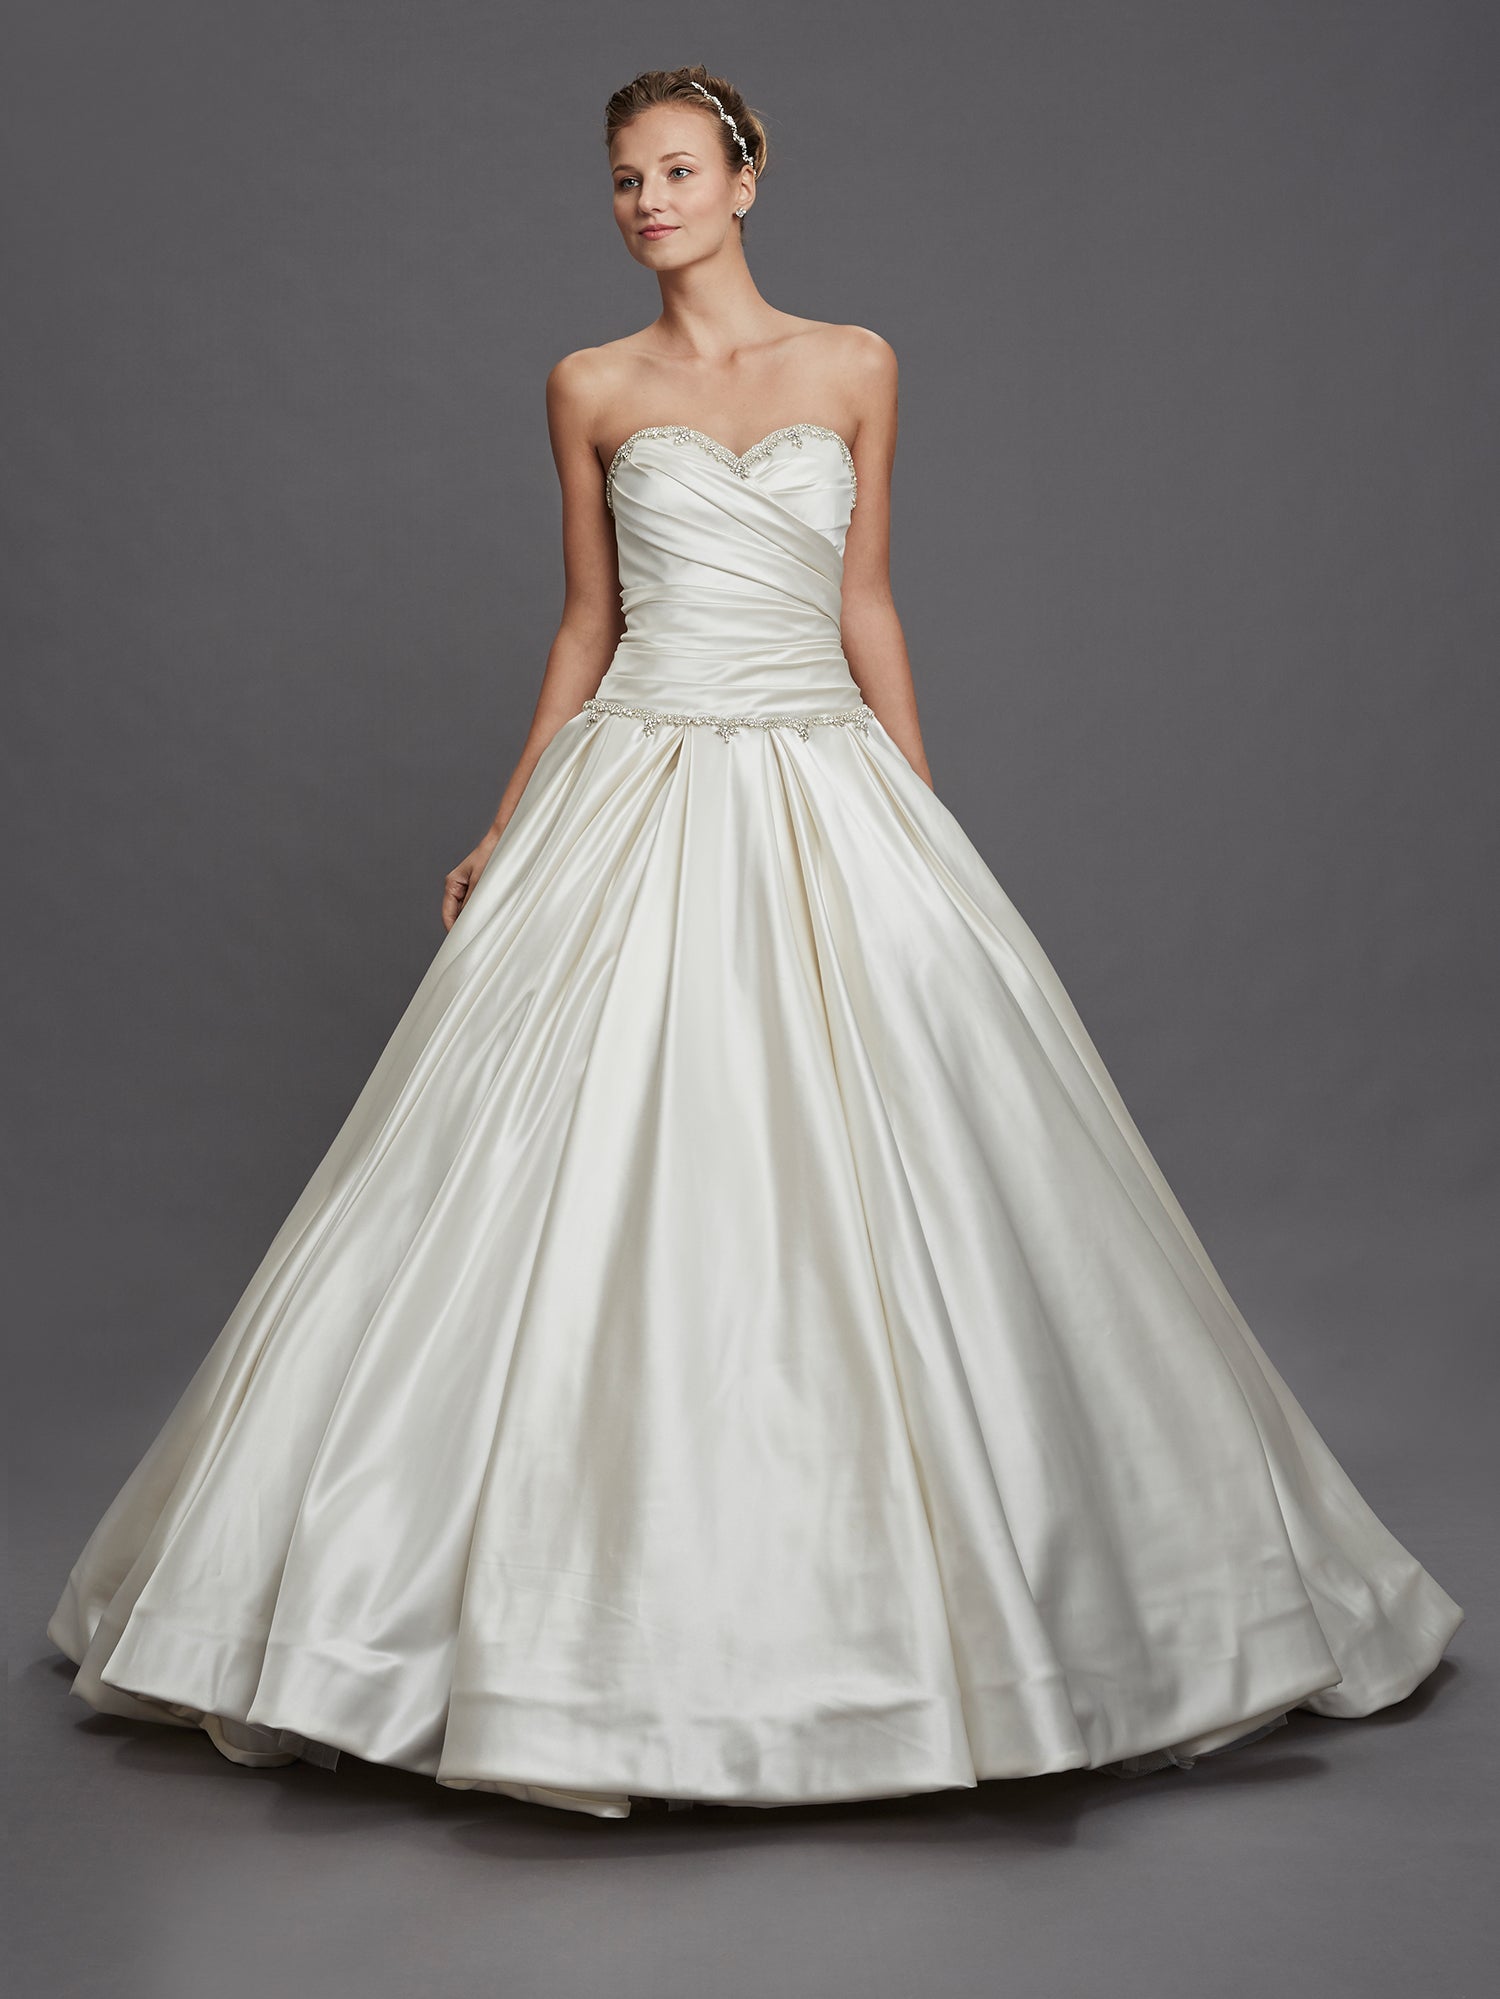 pnina tornai ball gown with crystals